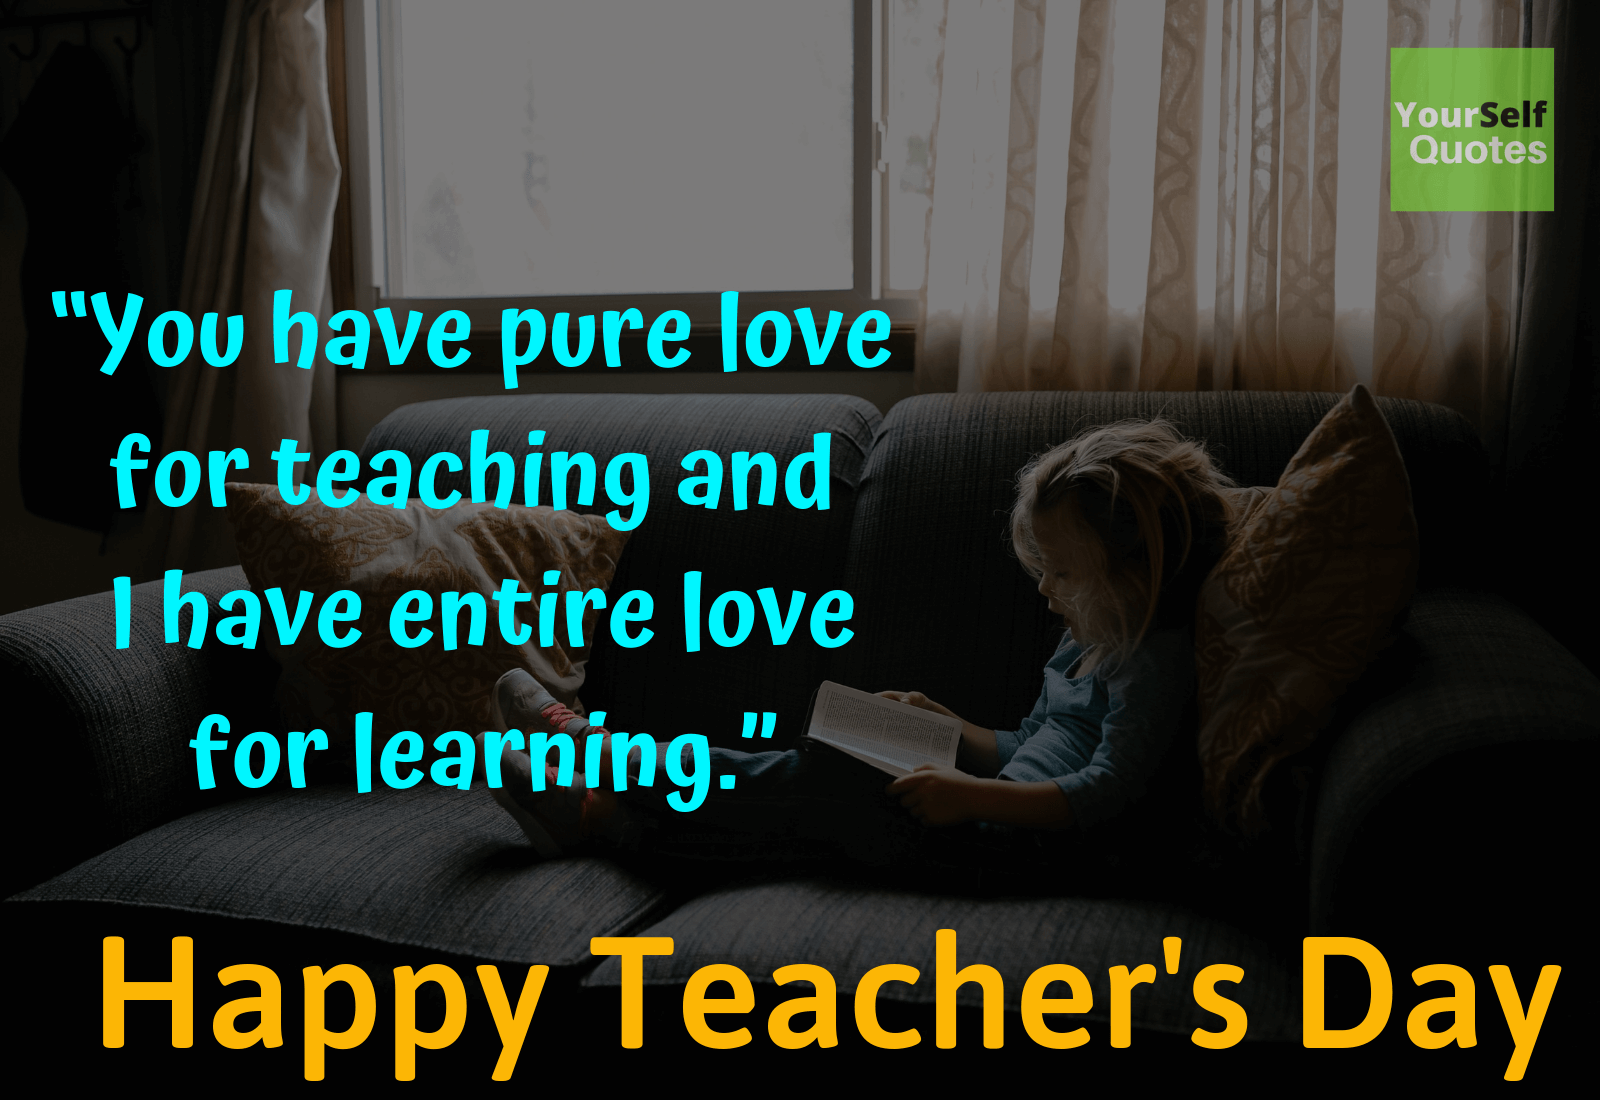 Best Teacher Day Quote and Wishes